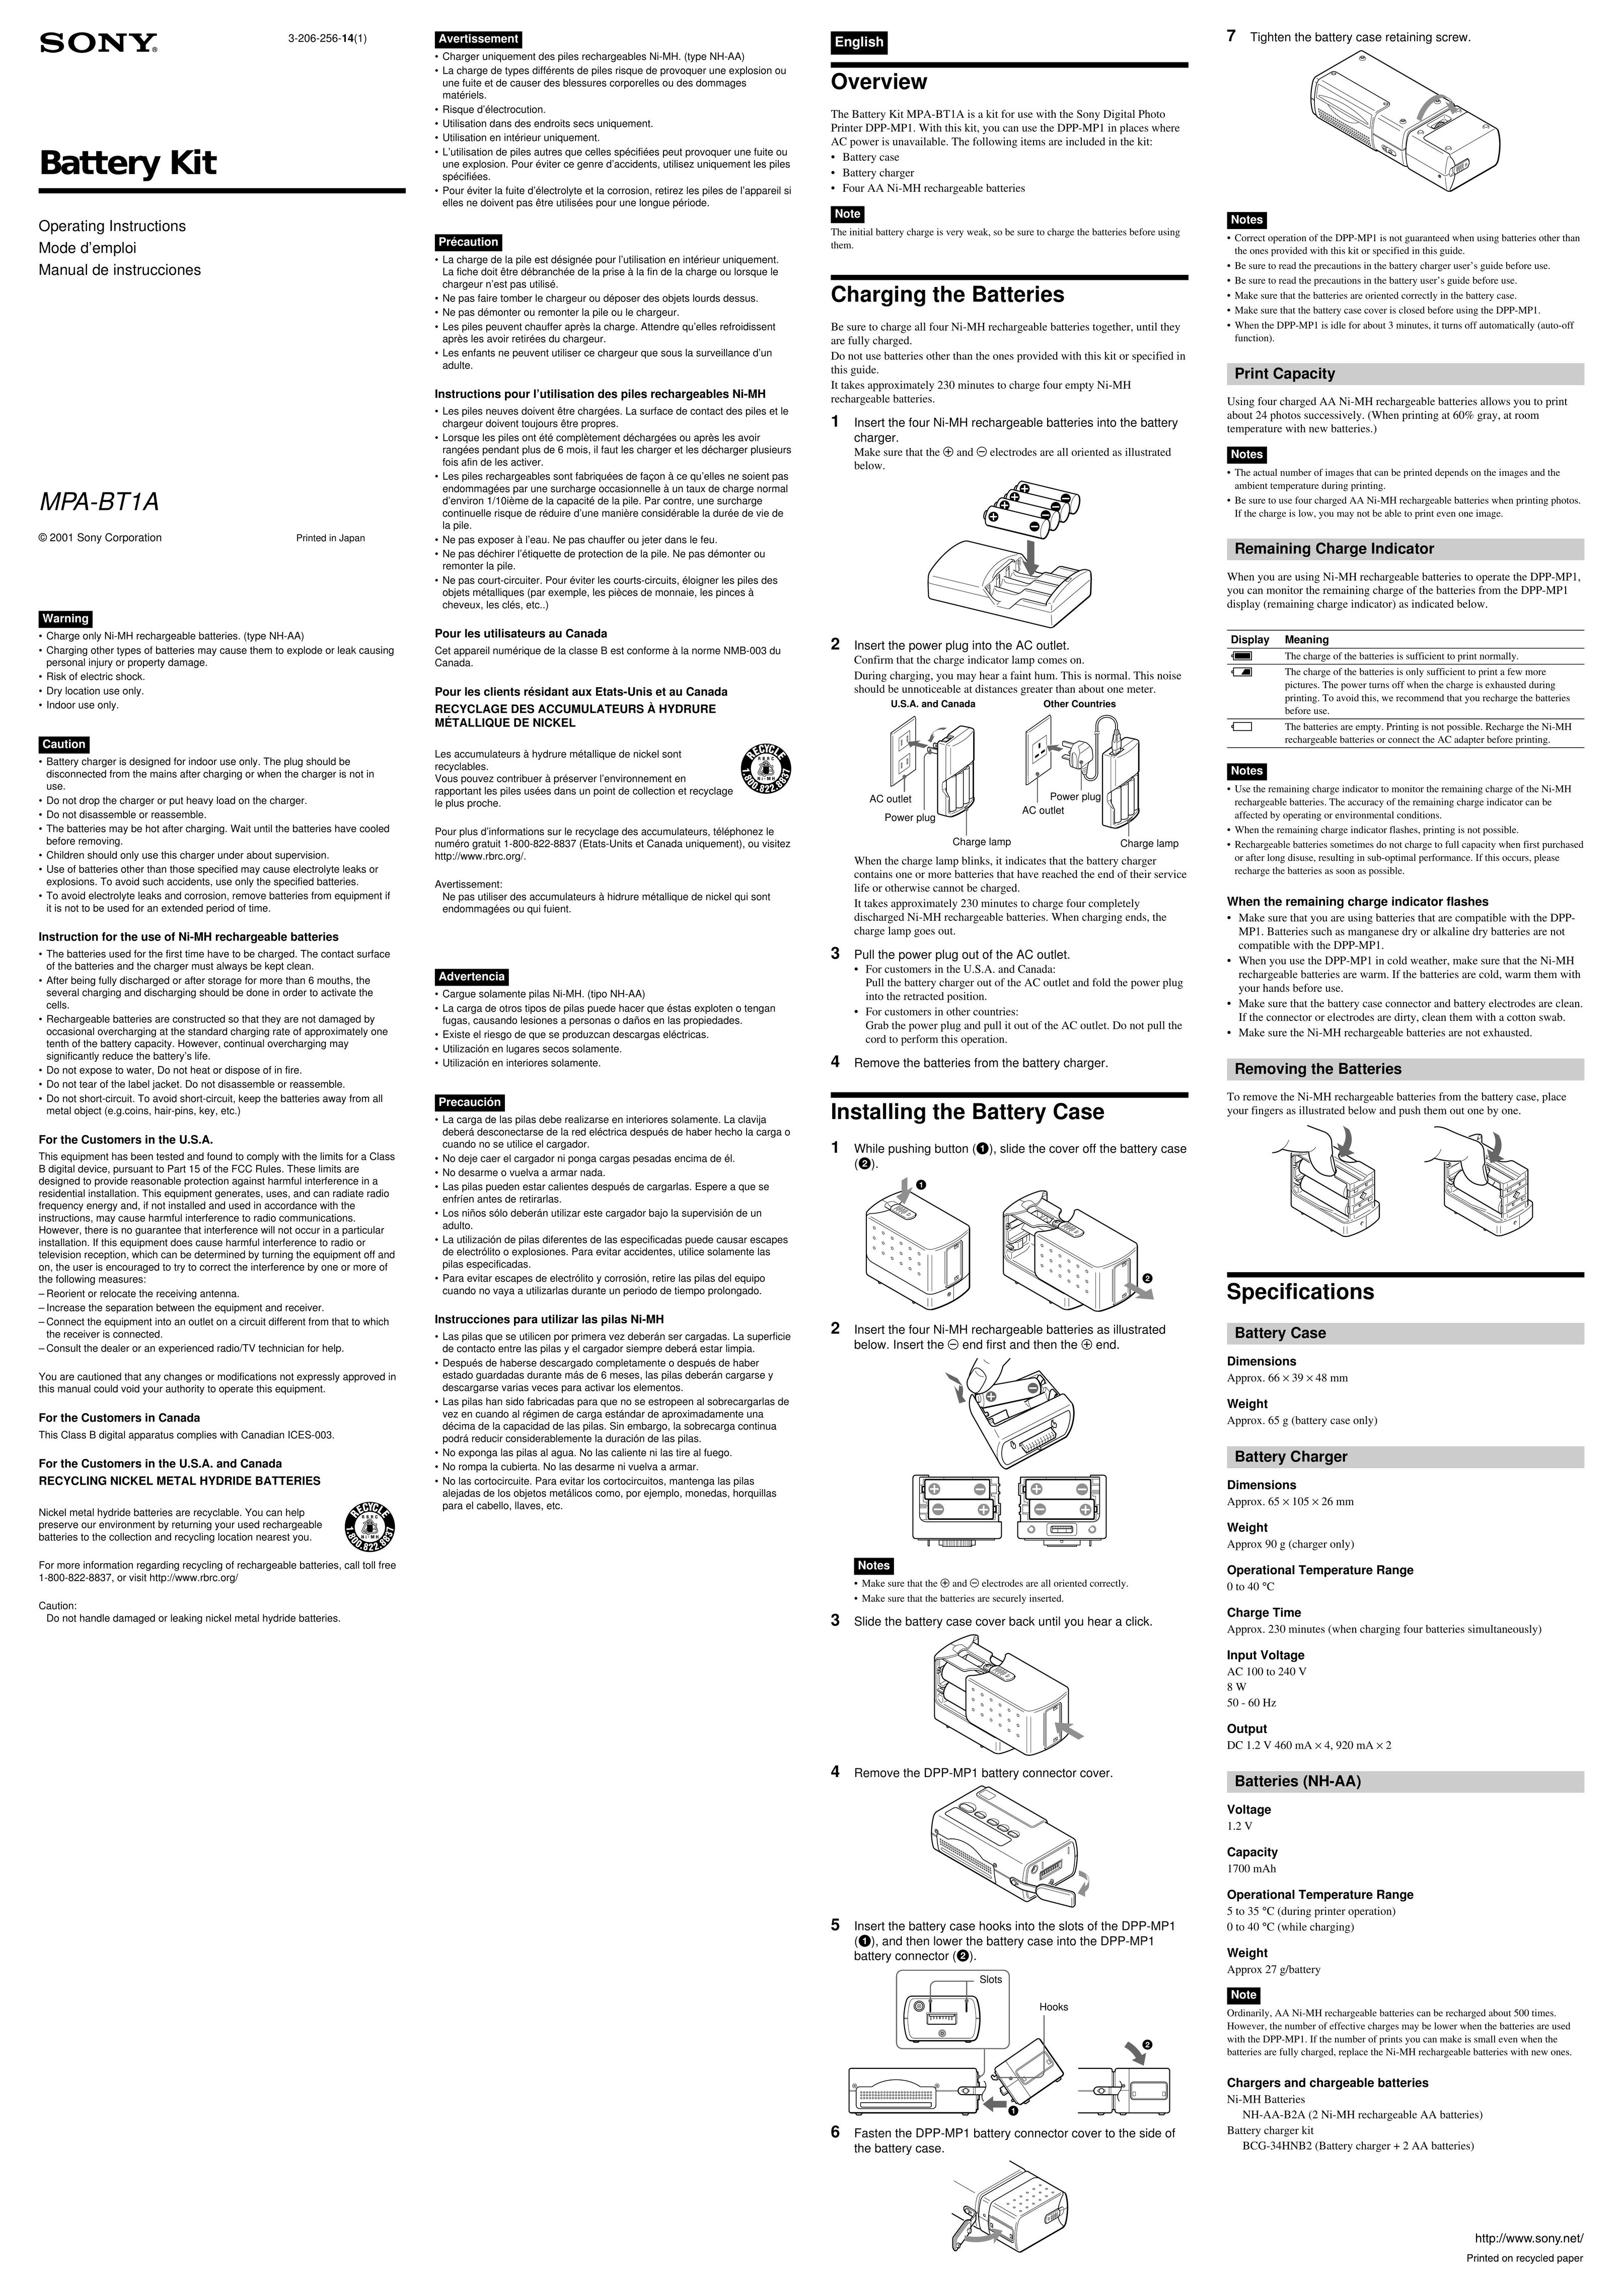 Sony MPA-BT1A Battery Charger User Manual